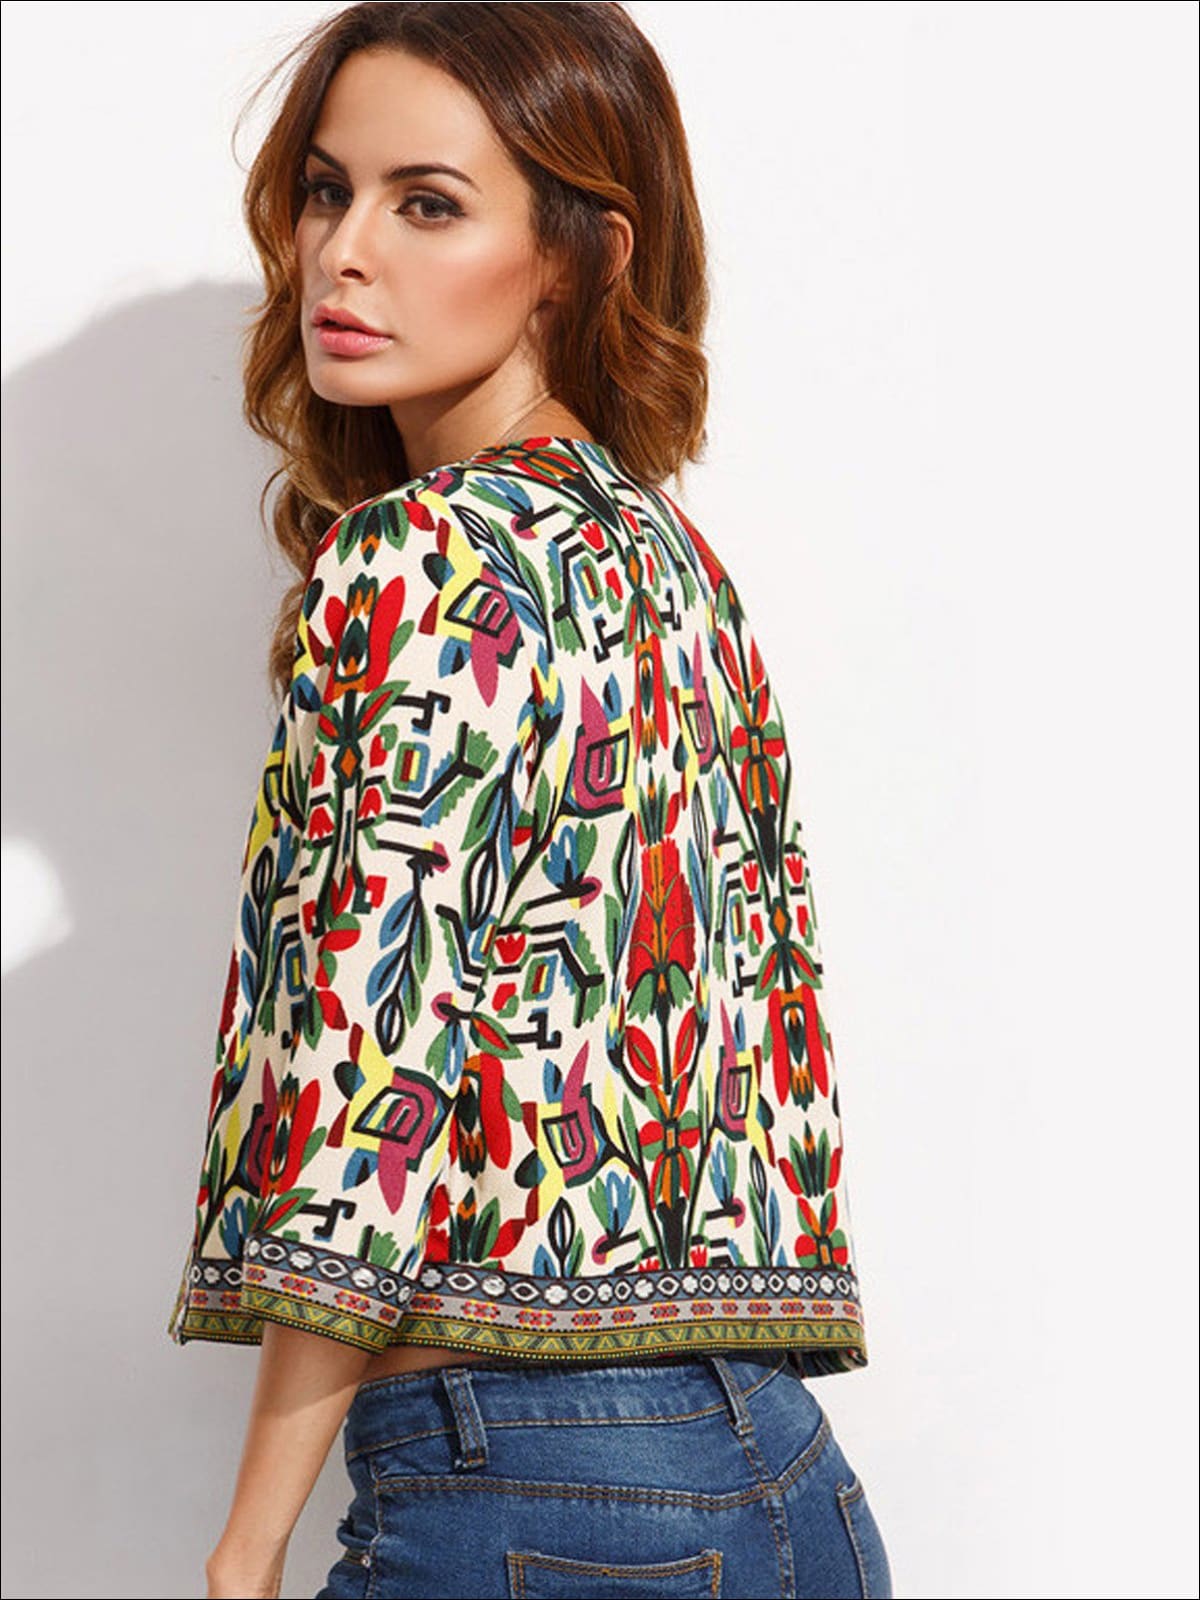 Womens Embroidered Tribal Print Jacket - Womens Fall Outerwear